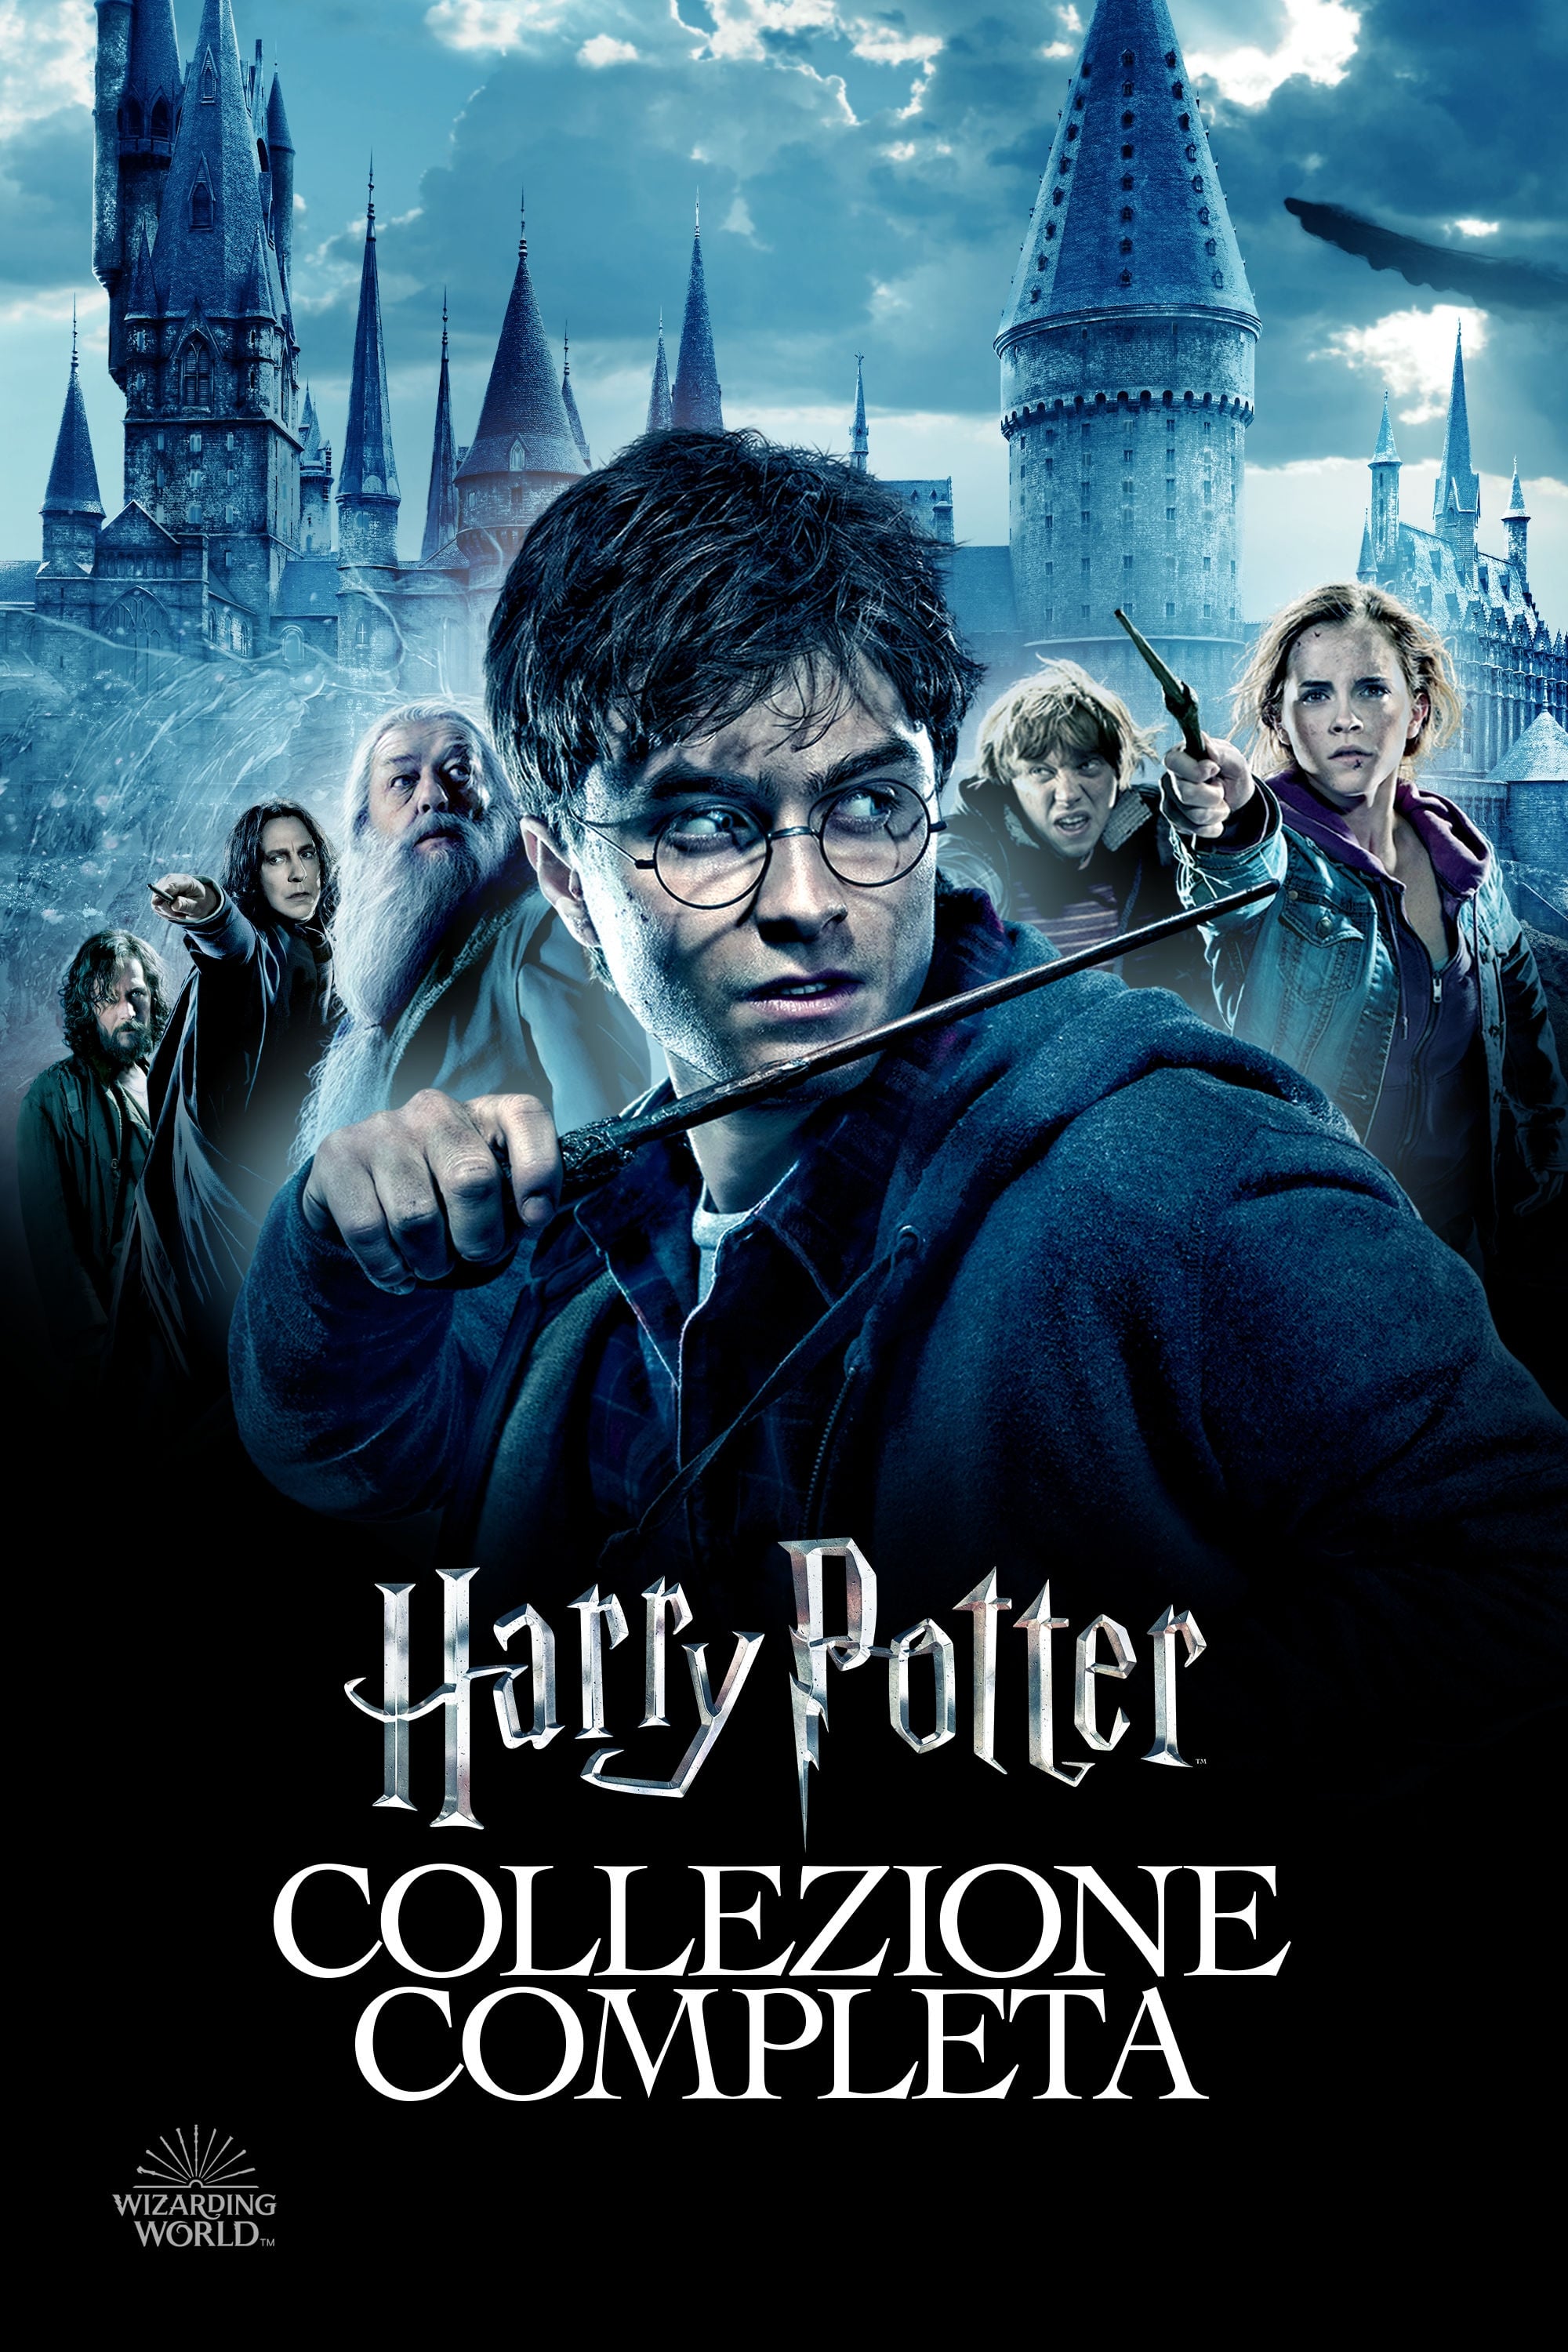 All movies from Harry Potter Collection saga are on movies.film-cine.com